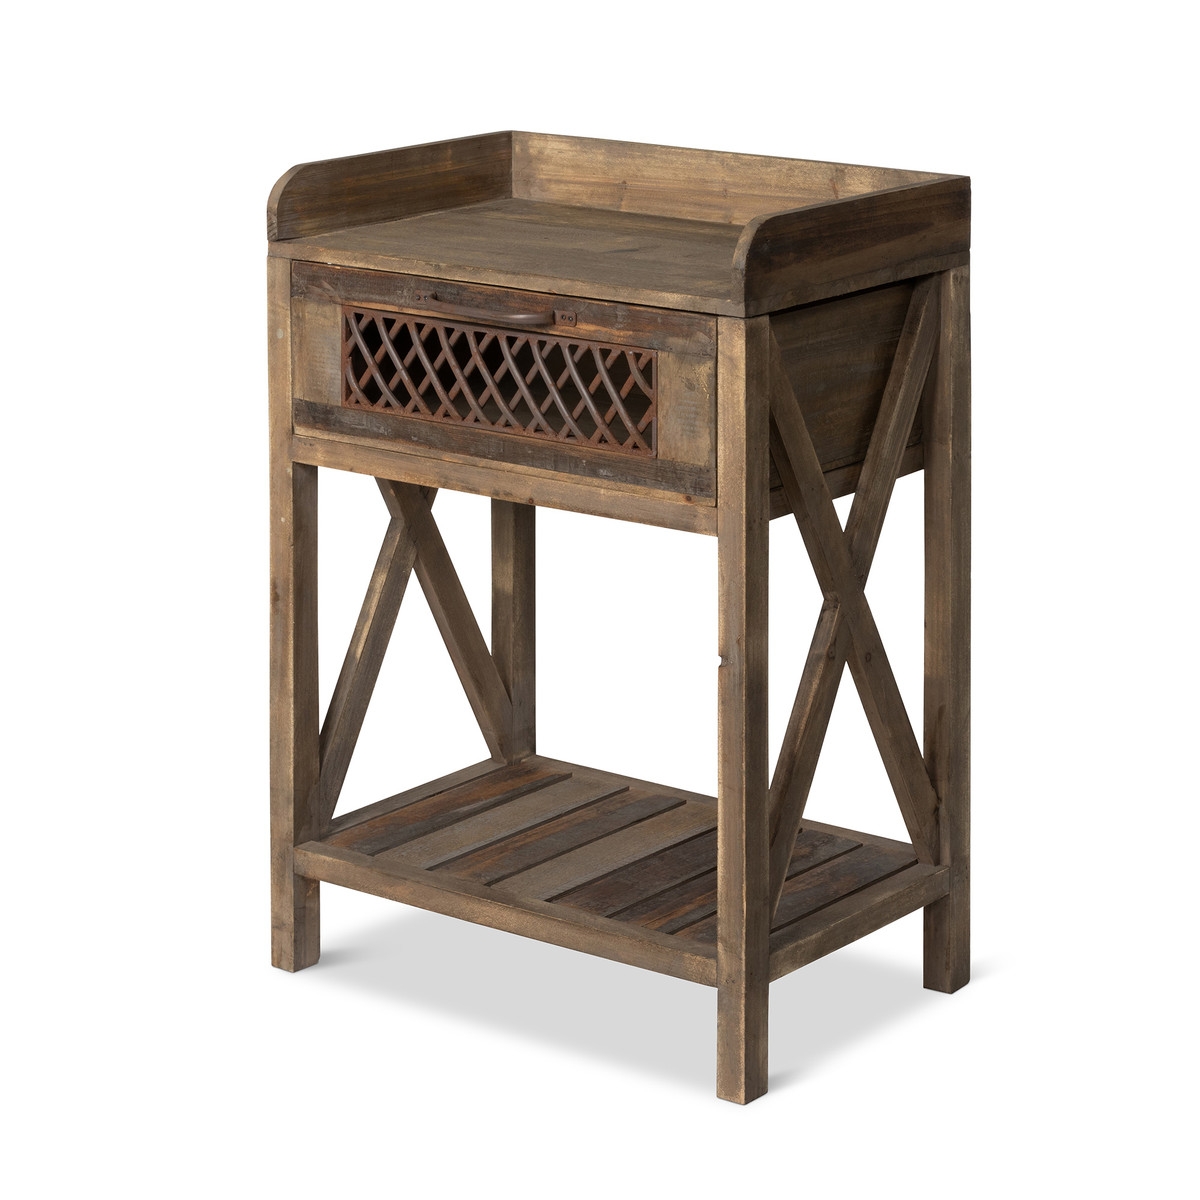 Park Hill Collection Iron Lattice Potting Bench In Natural